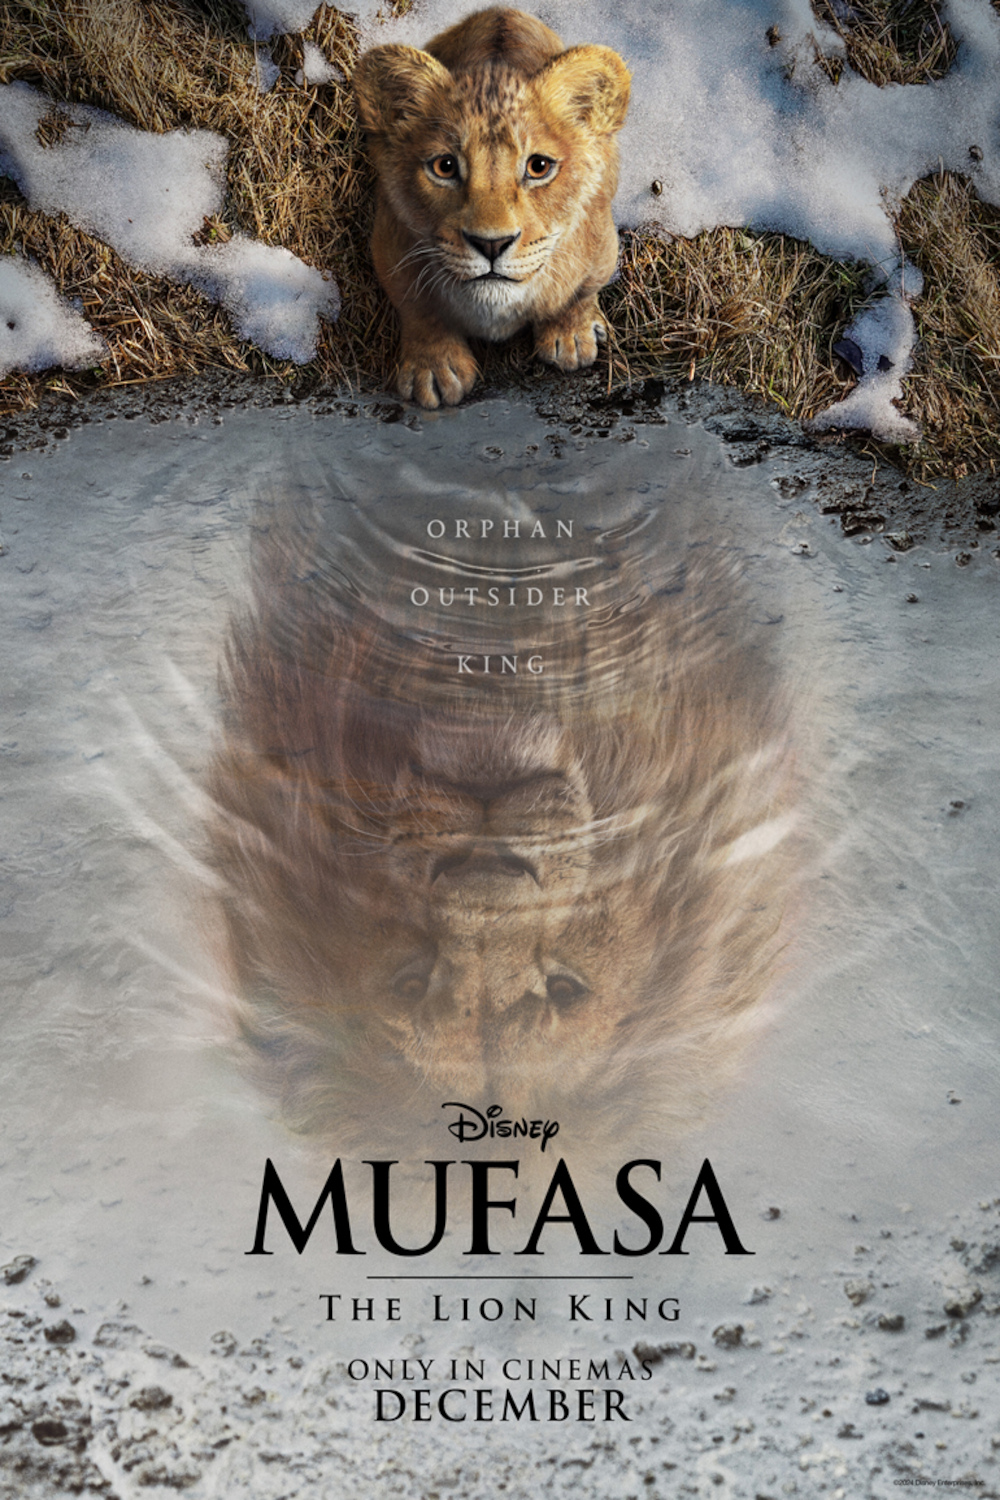 The First Trailer For Mufasa: The Lion King Has Dropped